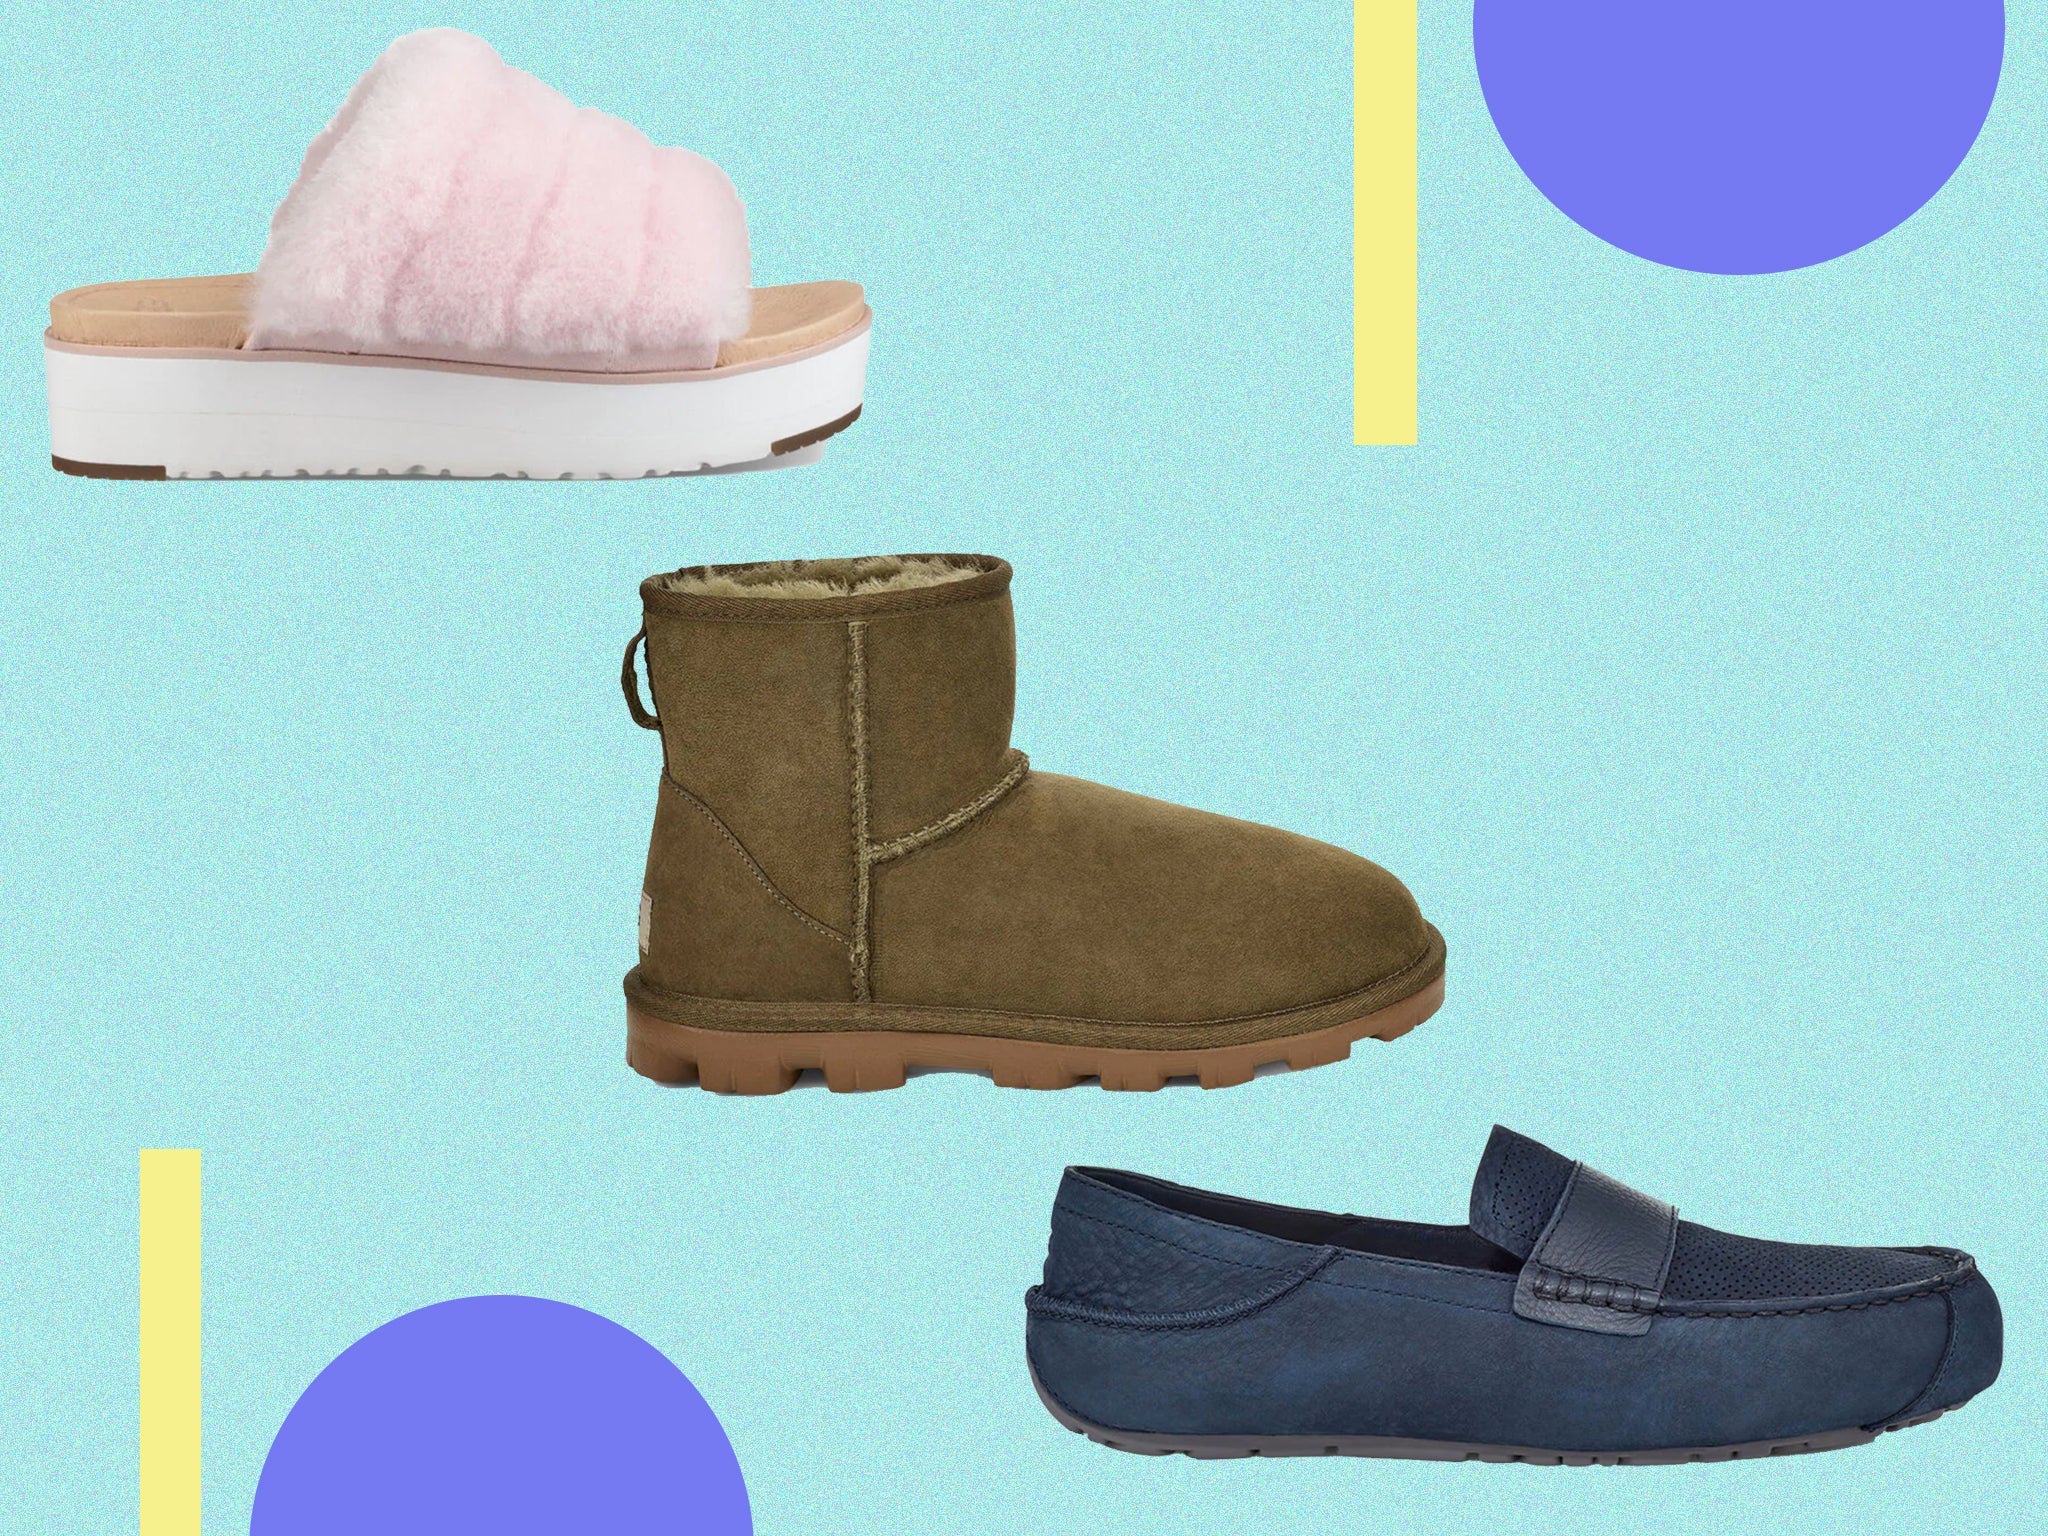 Ugg Boxing Day sale: Best deals on 